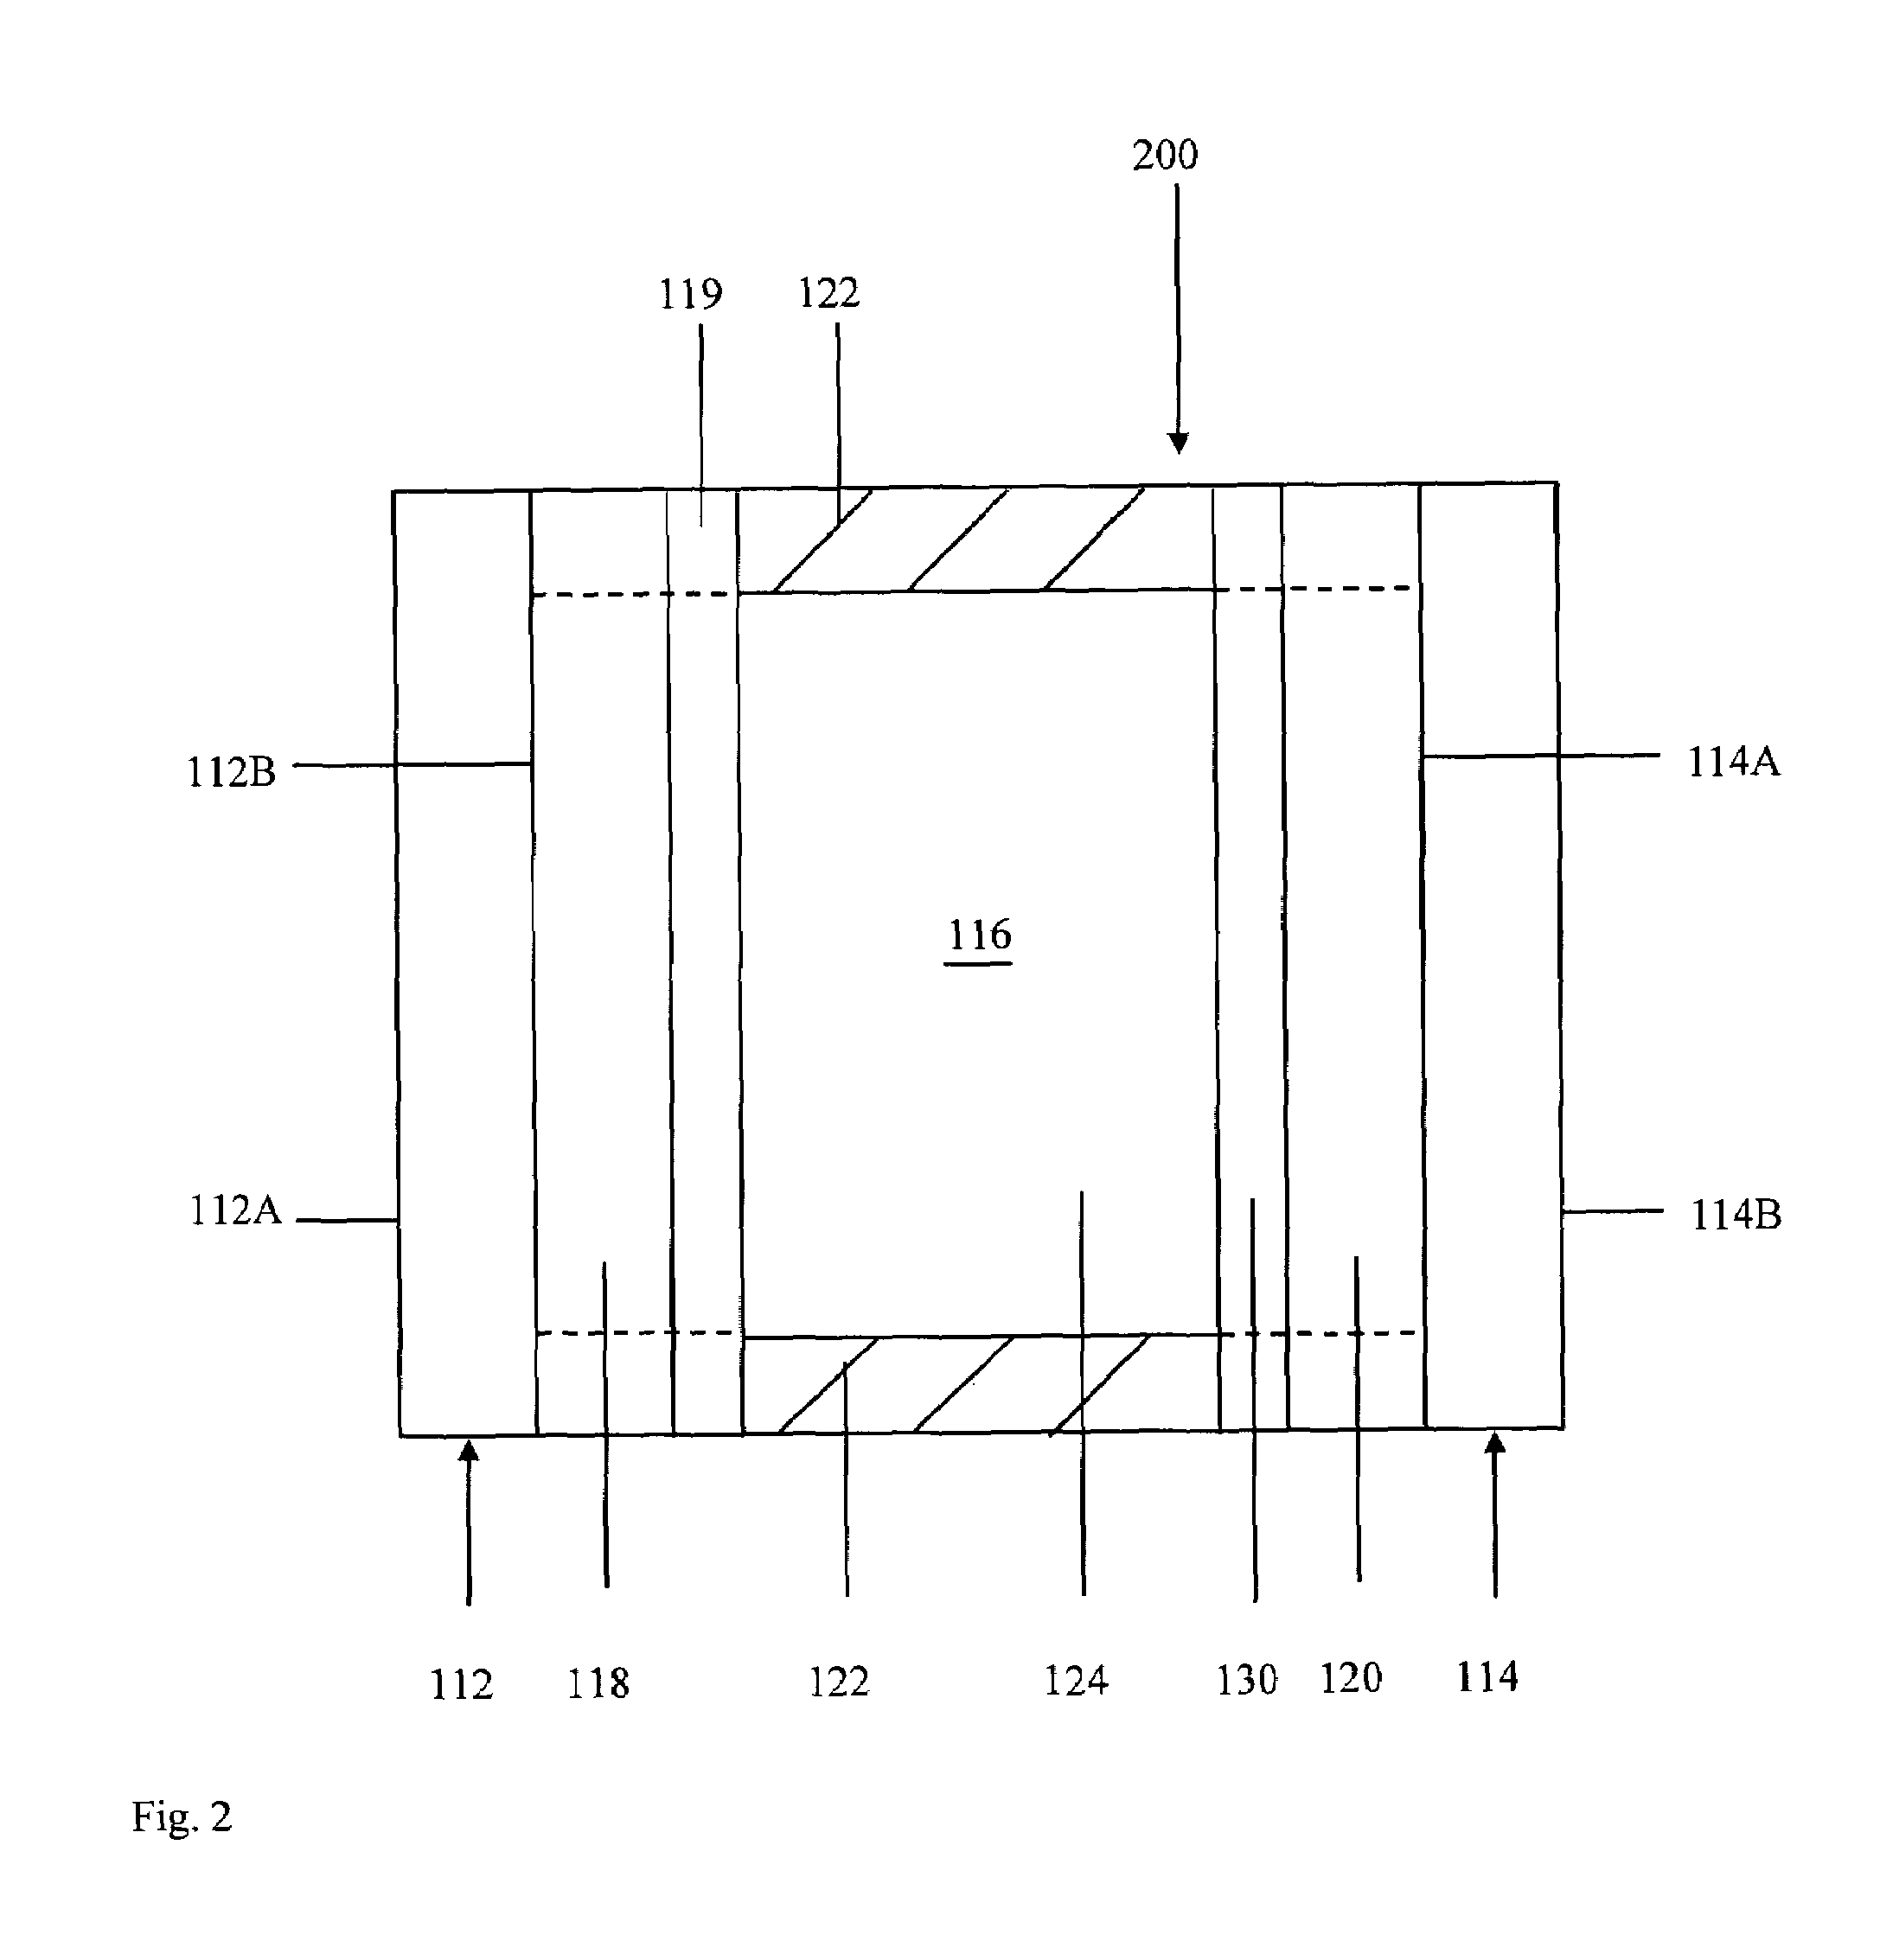 Nanocrystalline metal oxide films and associated devices comprising the same